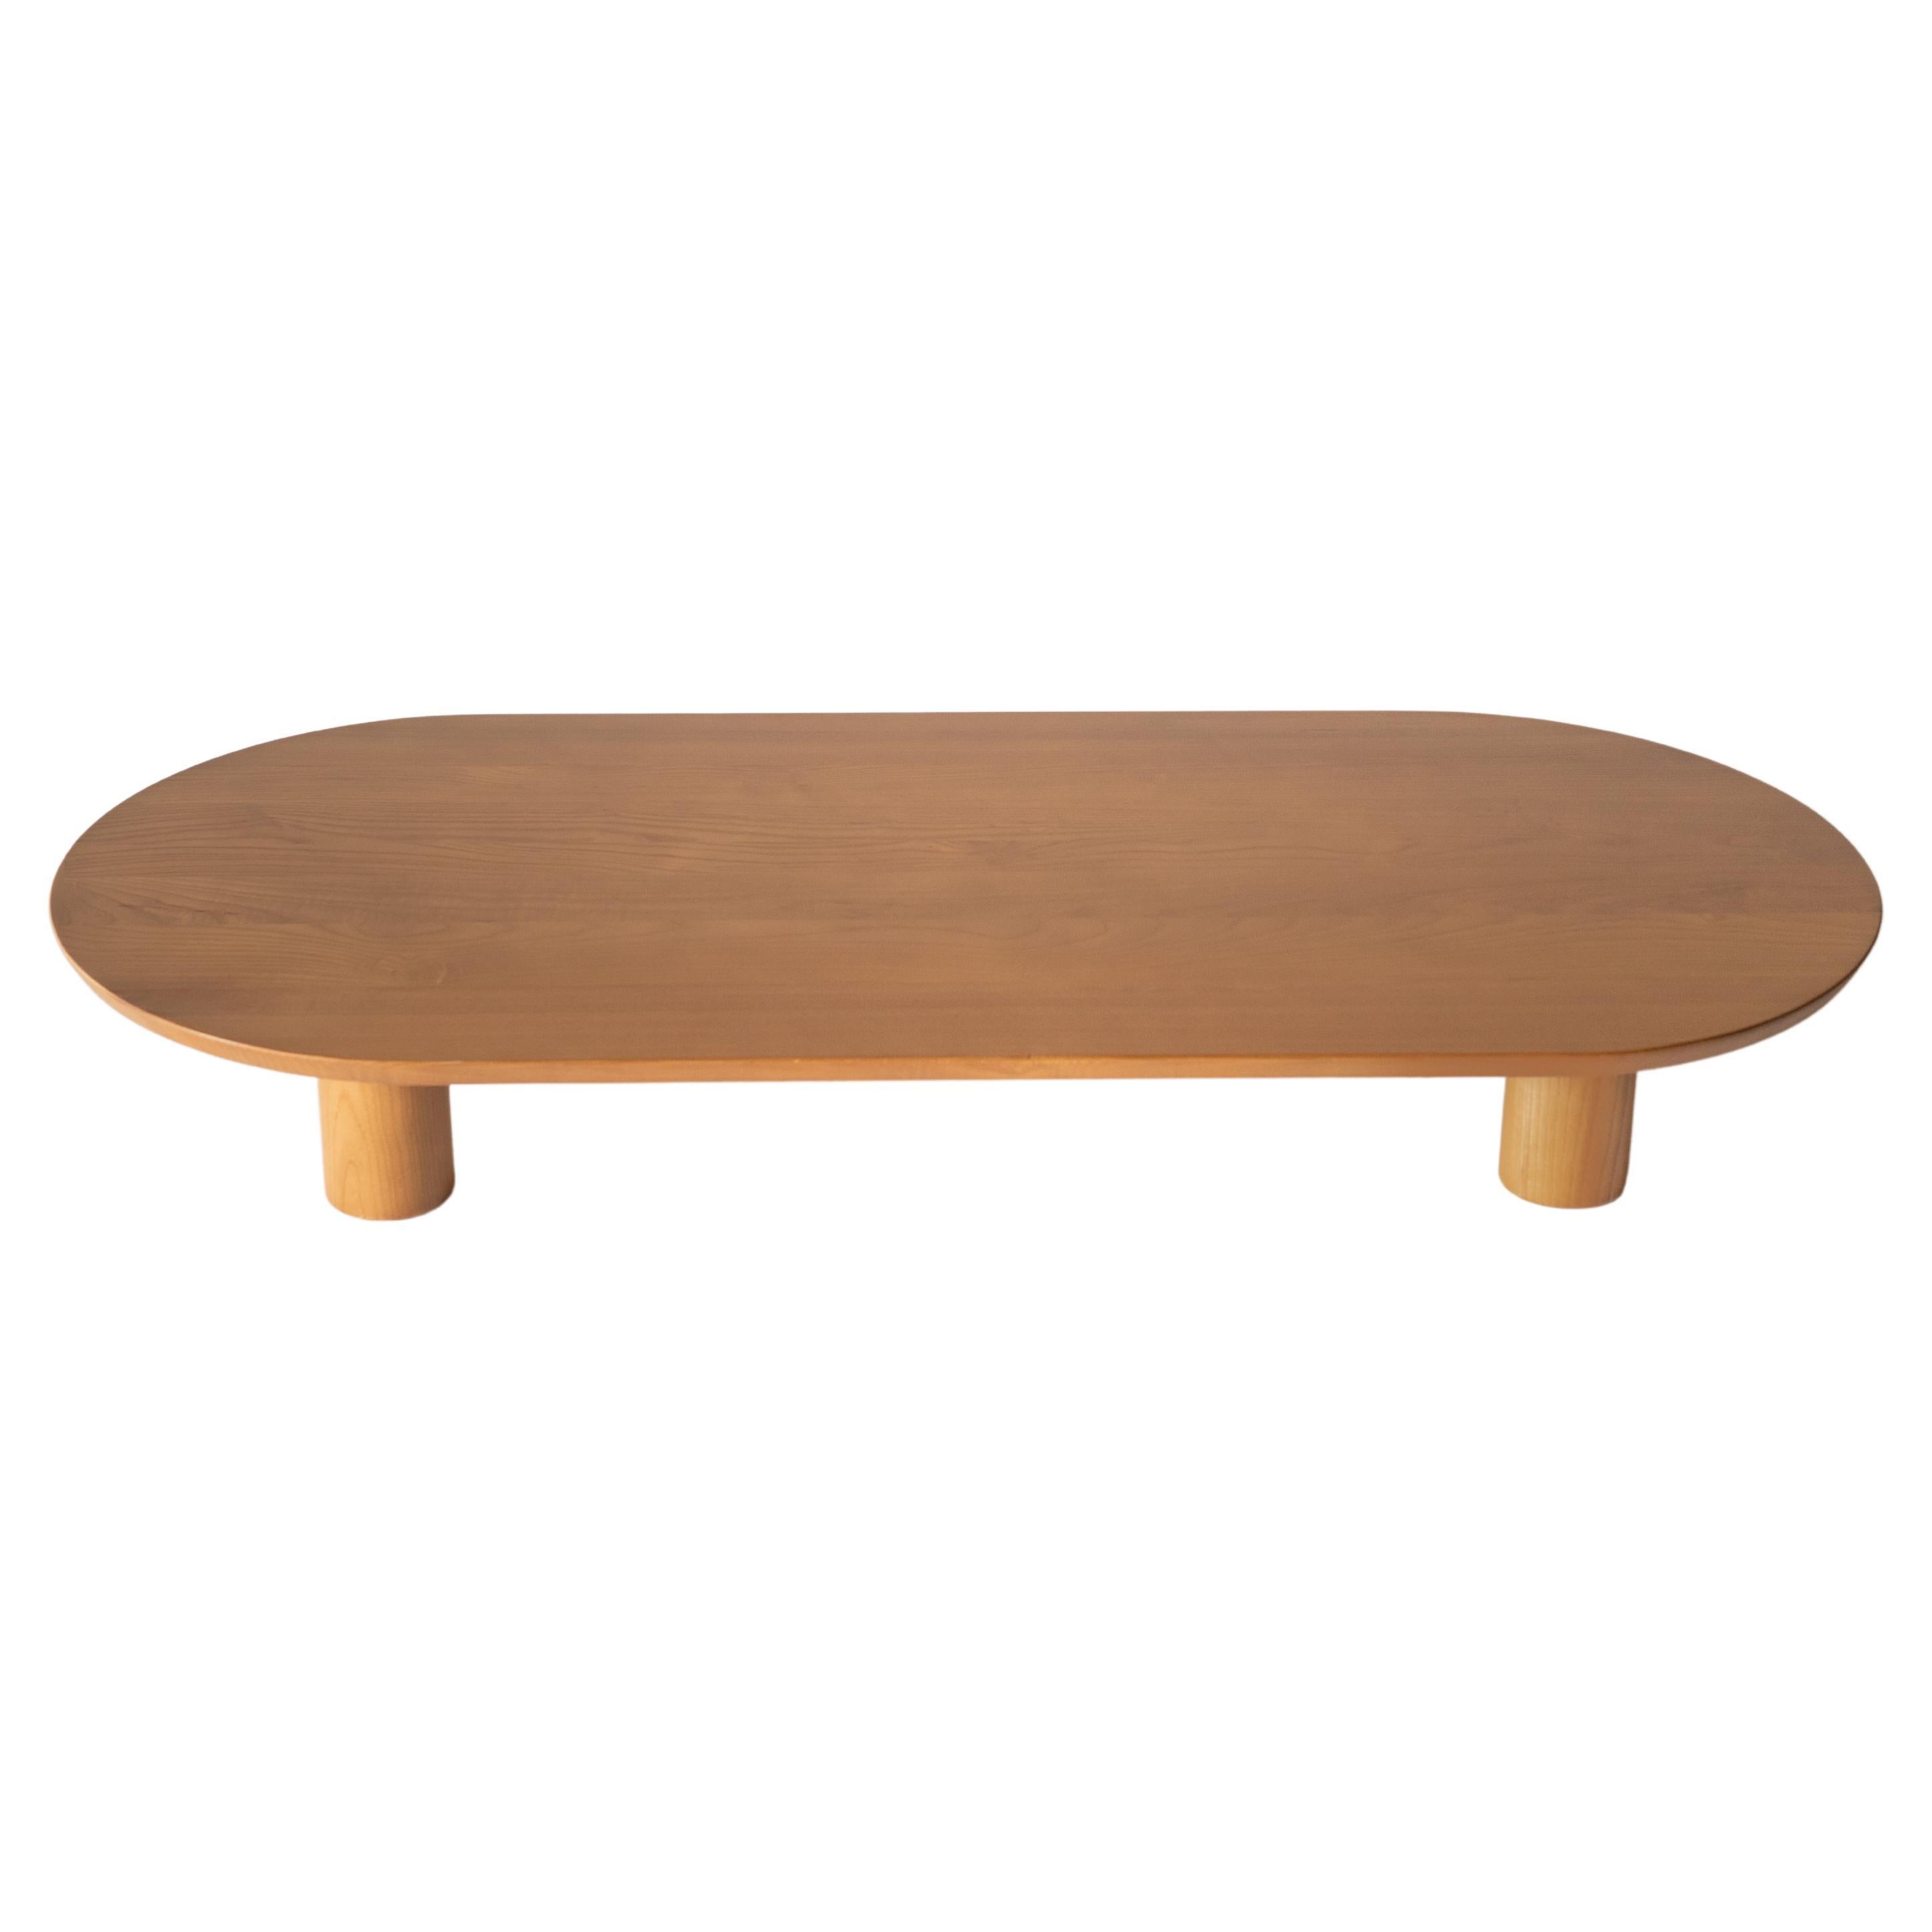 Ovie Coffee Table by Sun at Six, Sienna Coffee Table in Wood